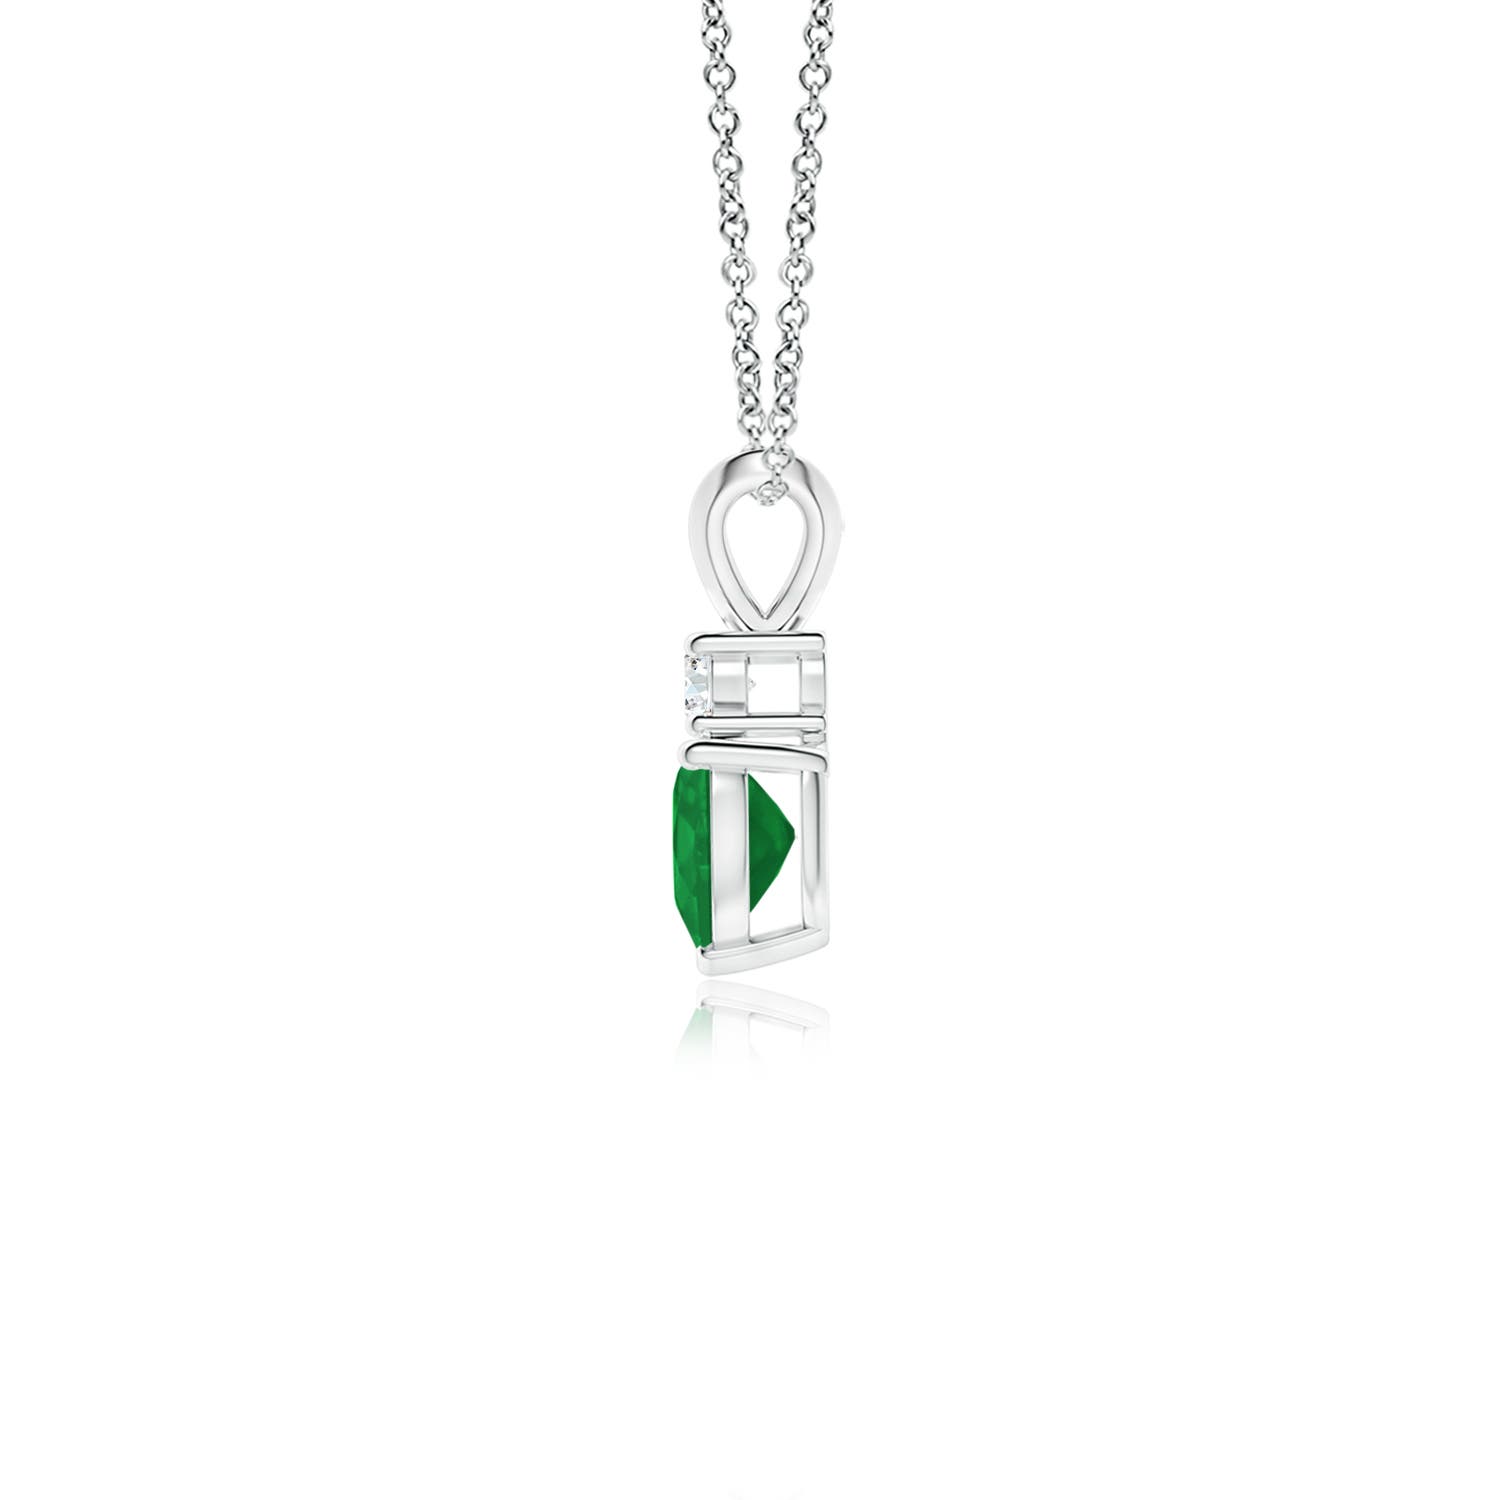 A - Emerald / 0.44 CT / 14 KT White Gold